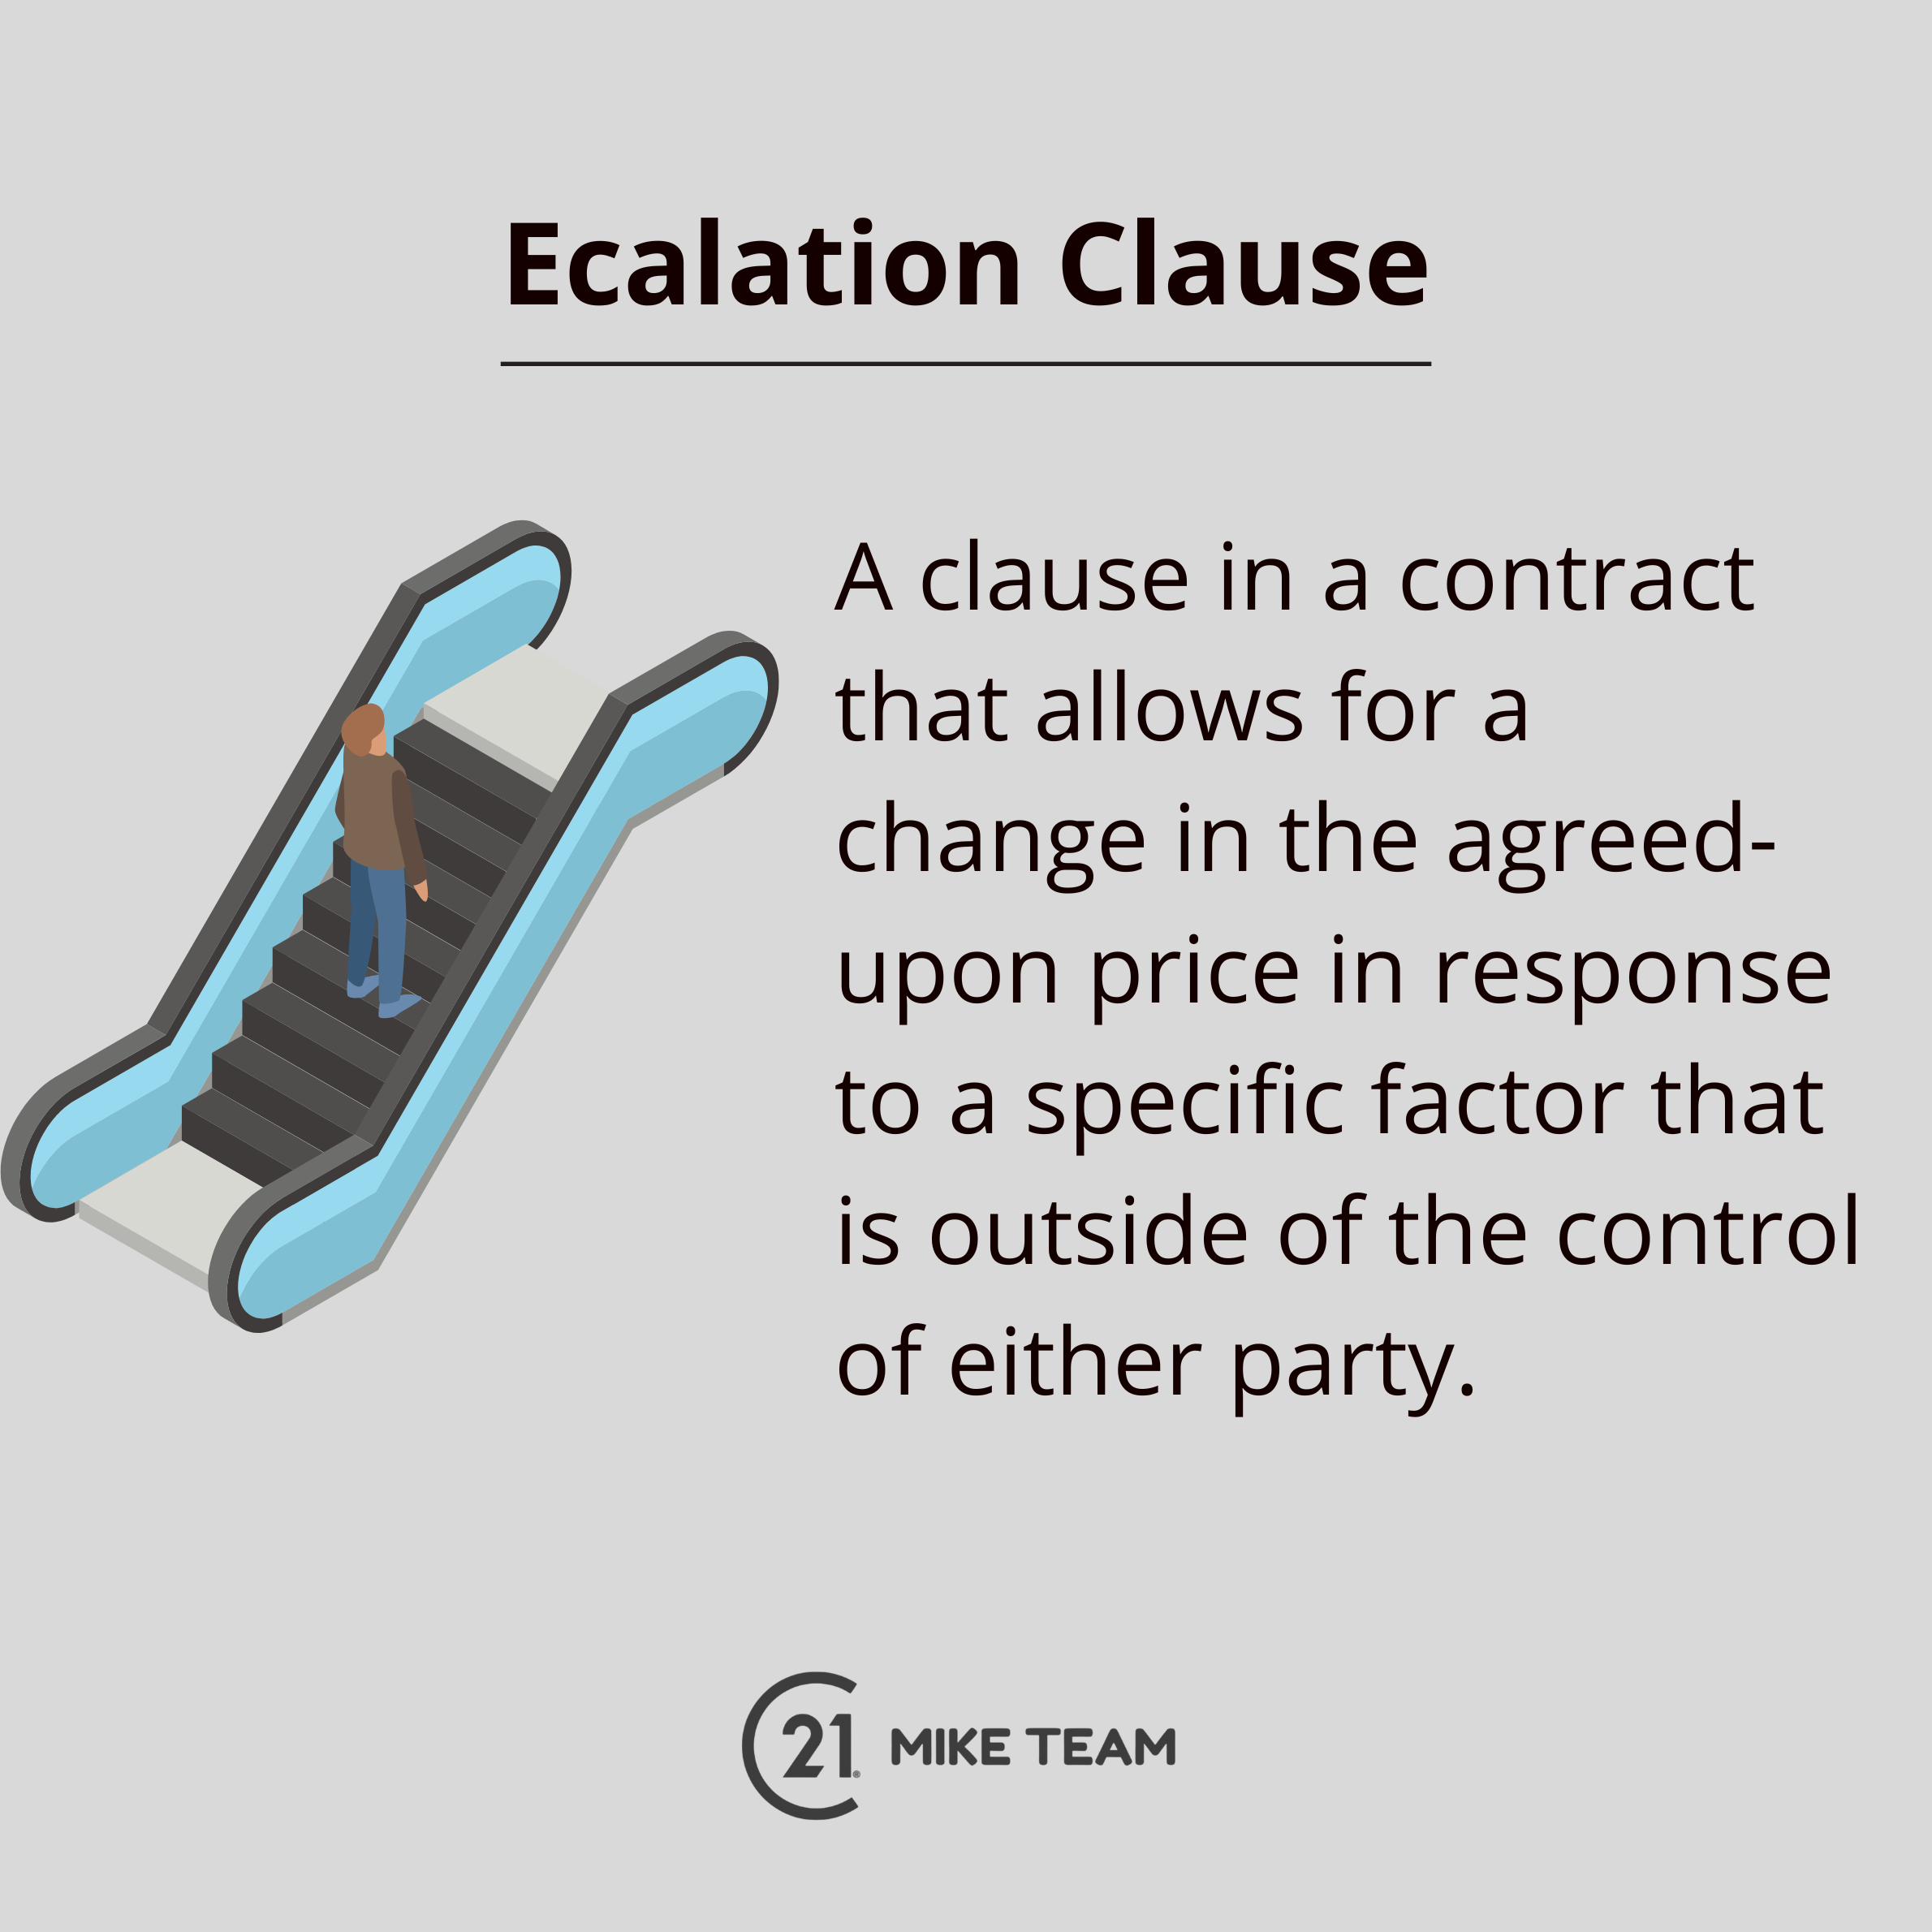 A clause in a contract that allows for a change in the agreed-upon price in response to a specific factor that is outside of the control of either party.